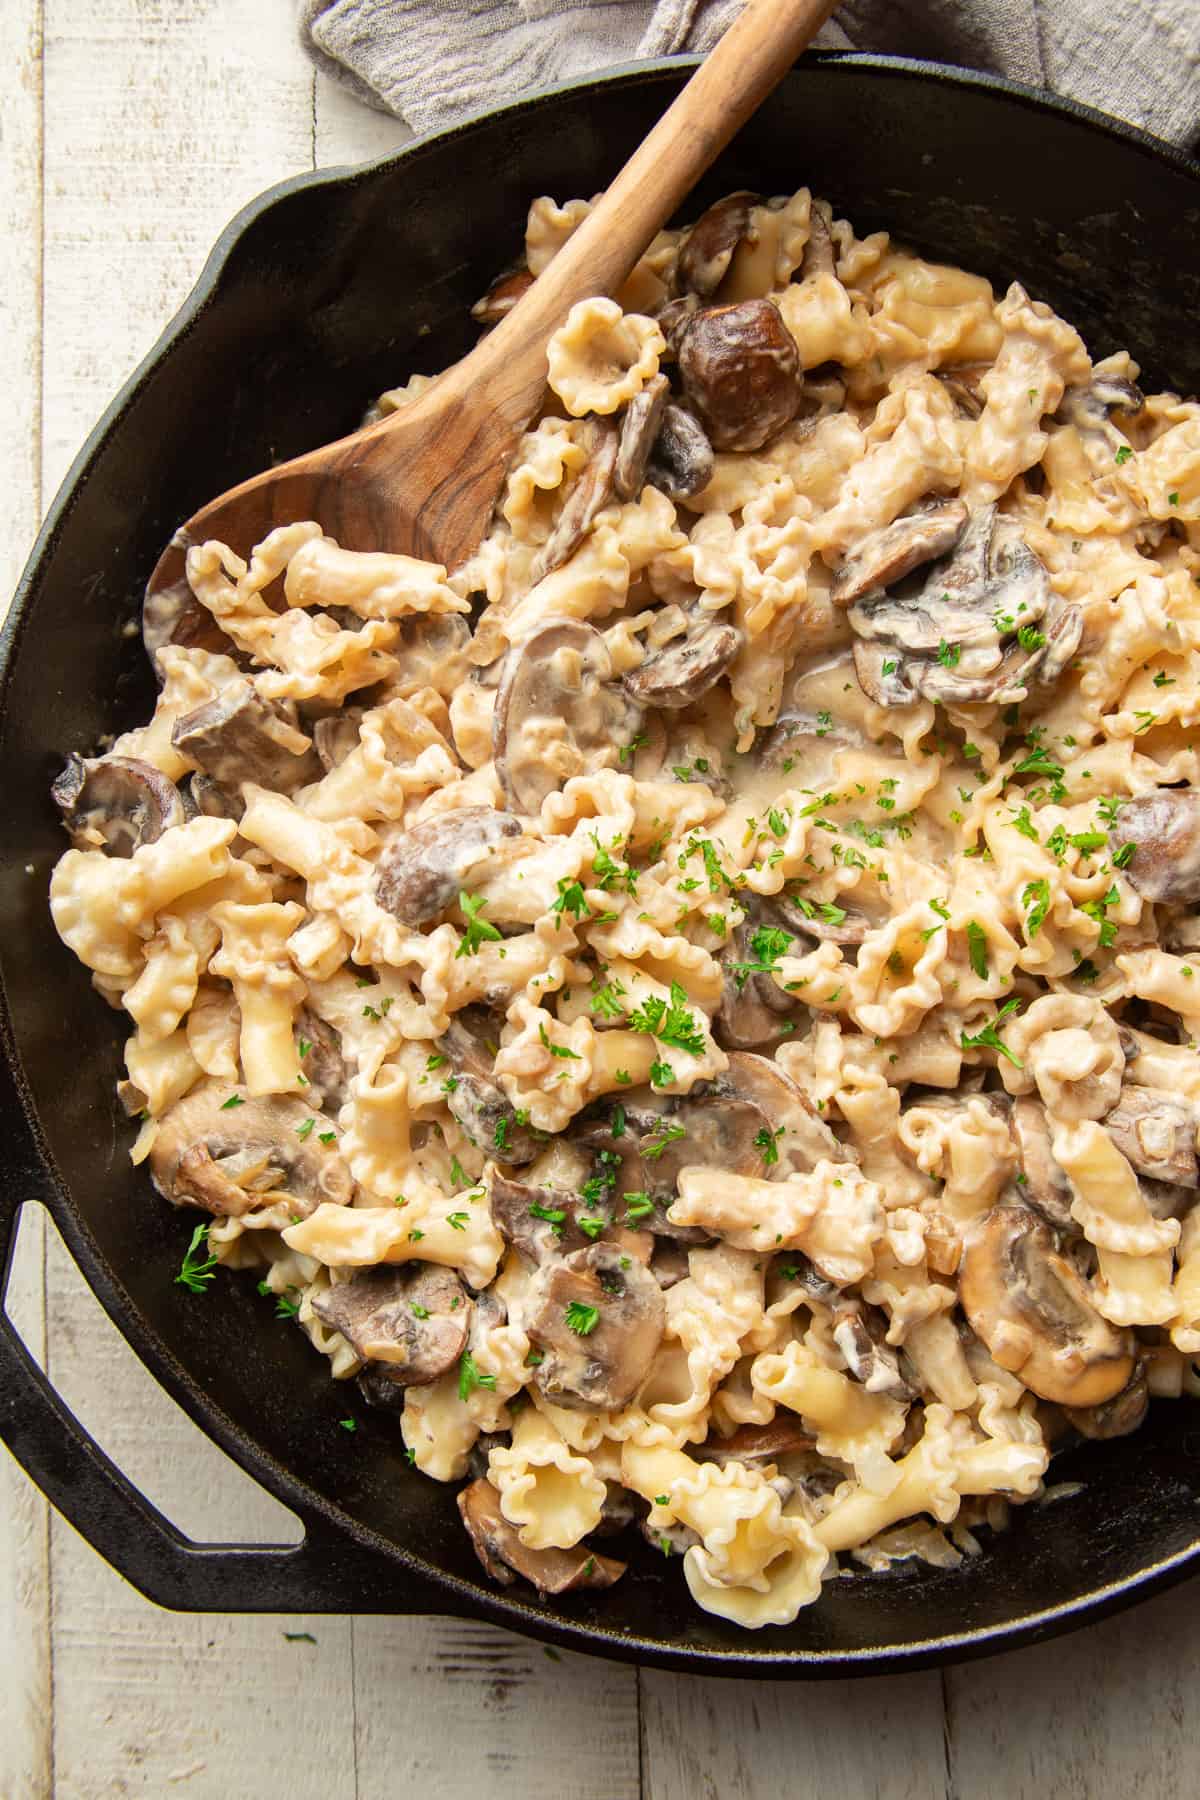 Skillet filled with Vegan Mushroom Stroganoff with a wooden spoon.